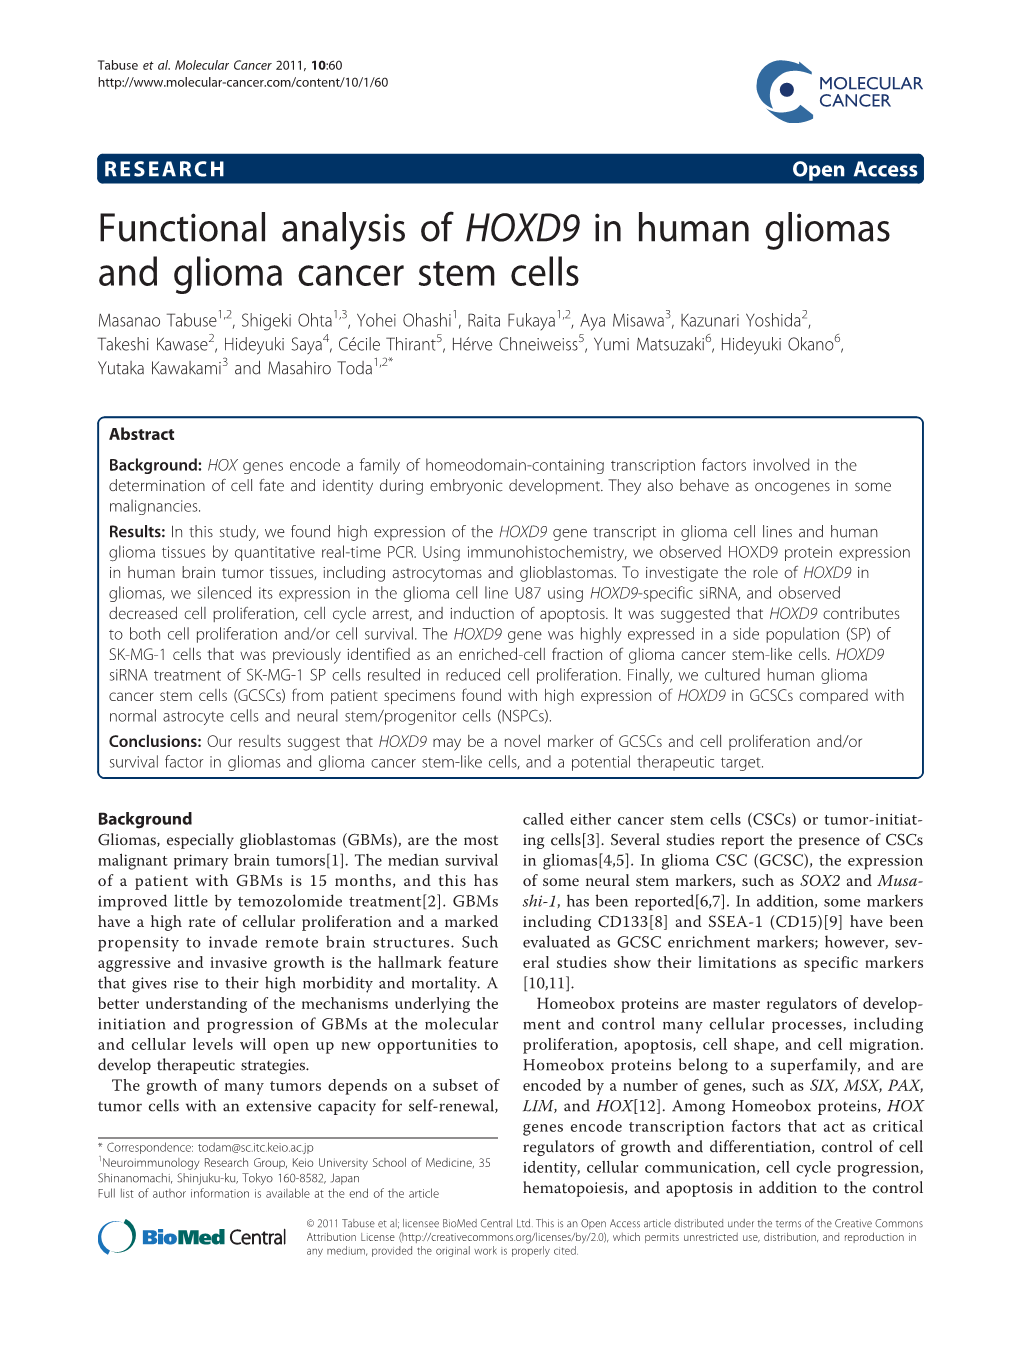 Functional Analysis of HOXD9 in Human Gliomas and Glioma Cancer Stem Cells